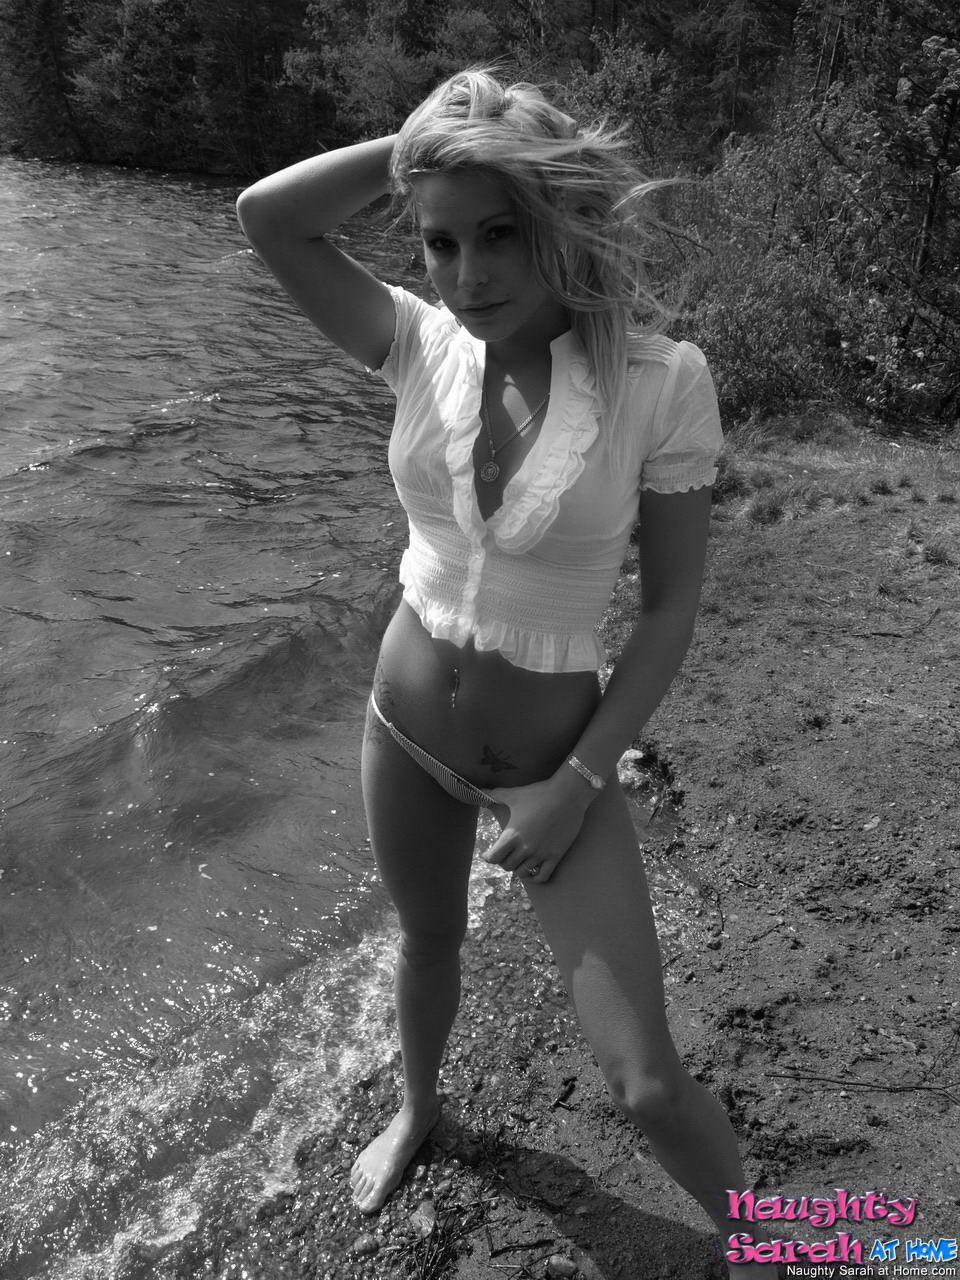 Pictures of Naughty Sarah on the beach in black and white